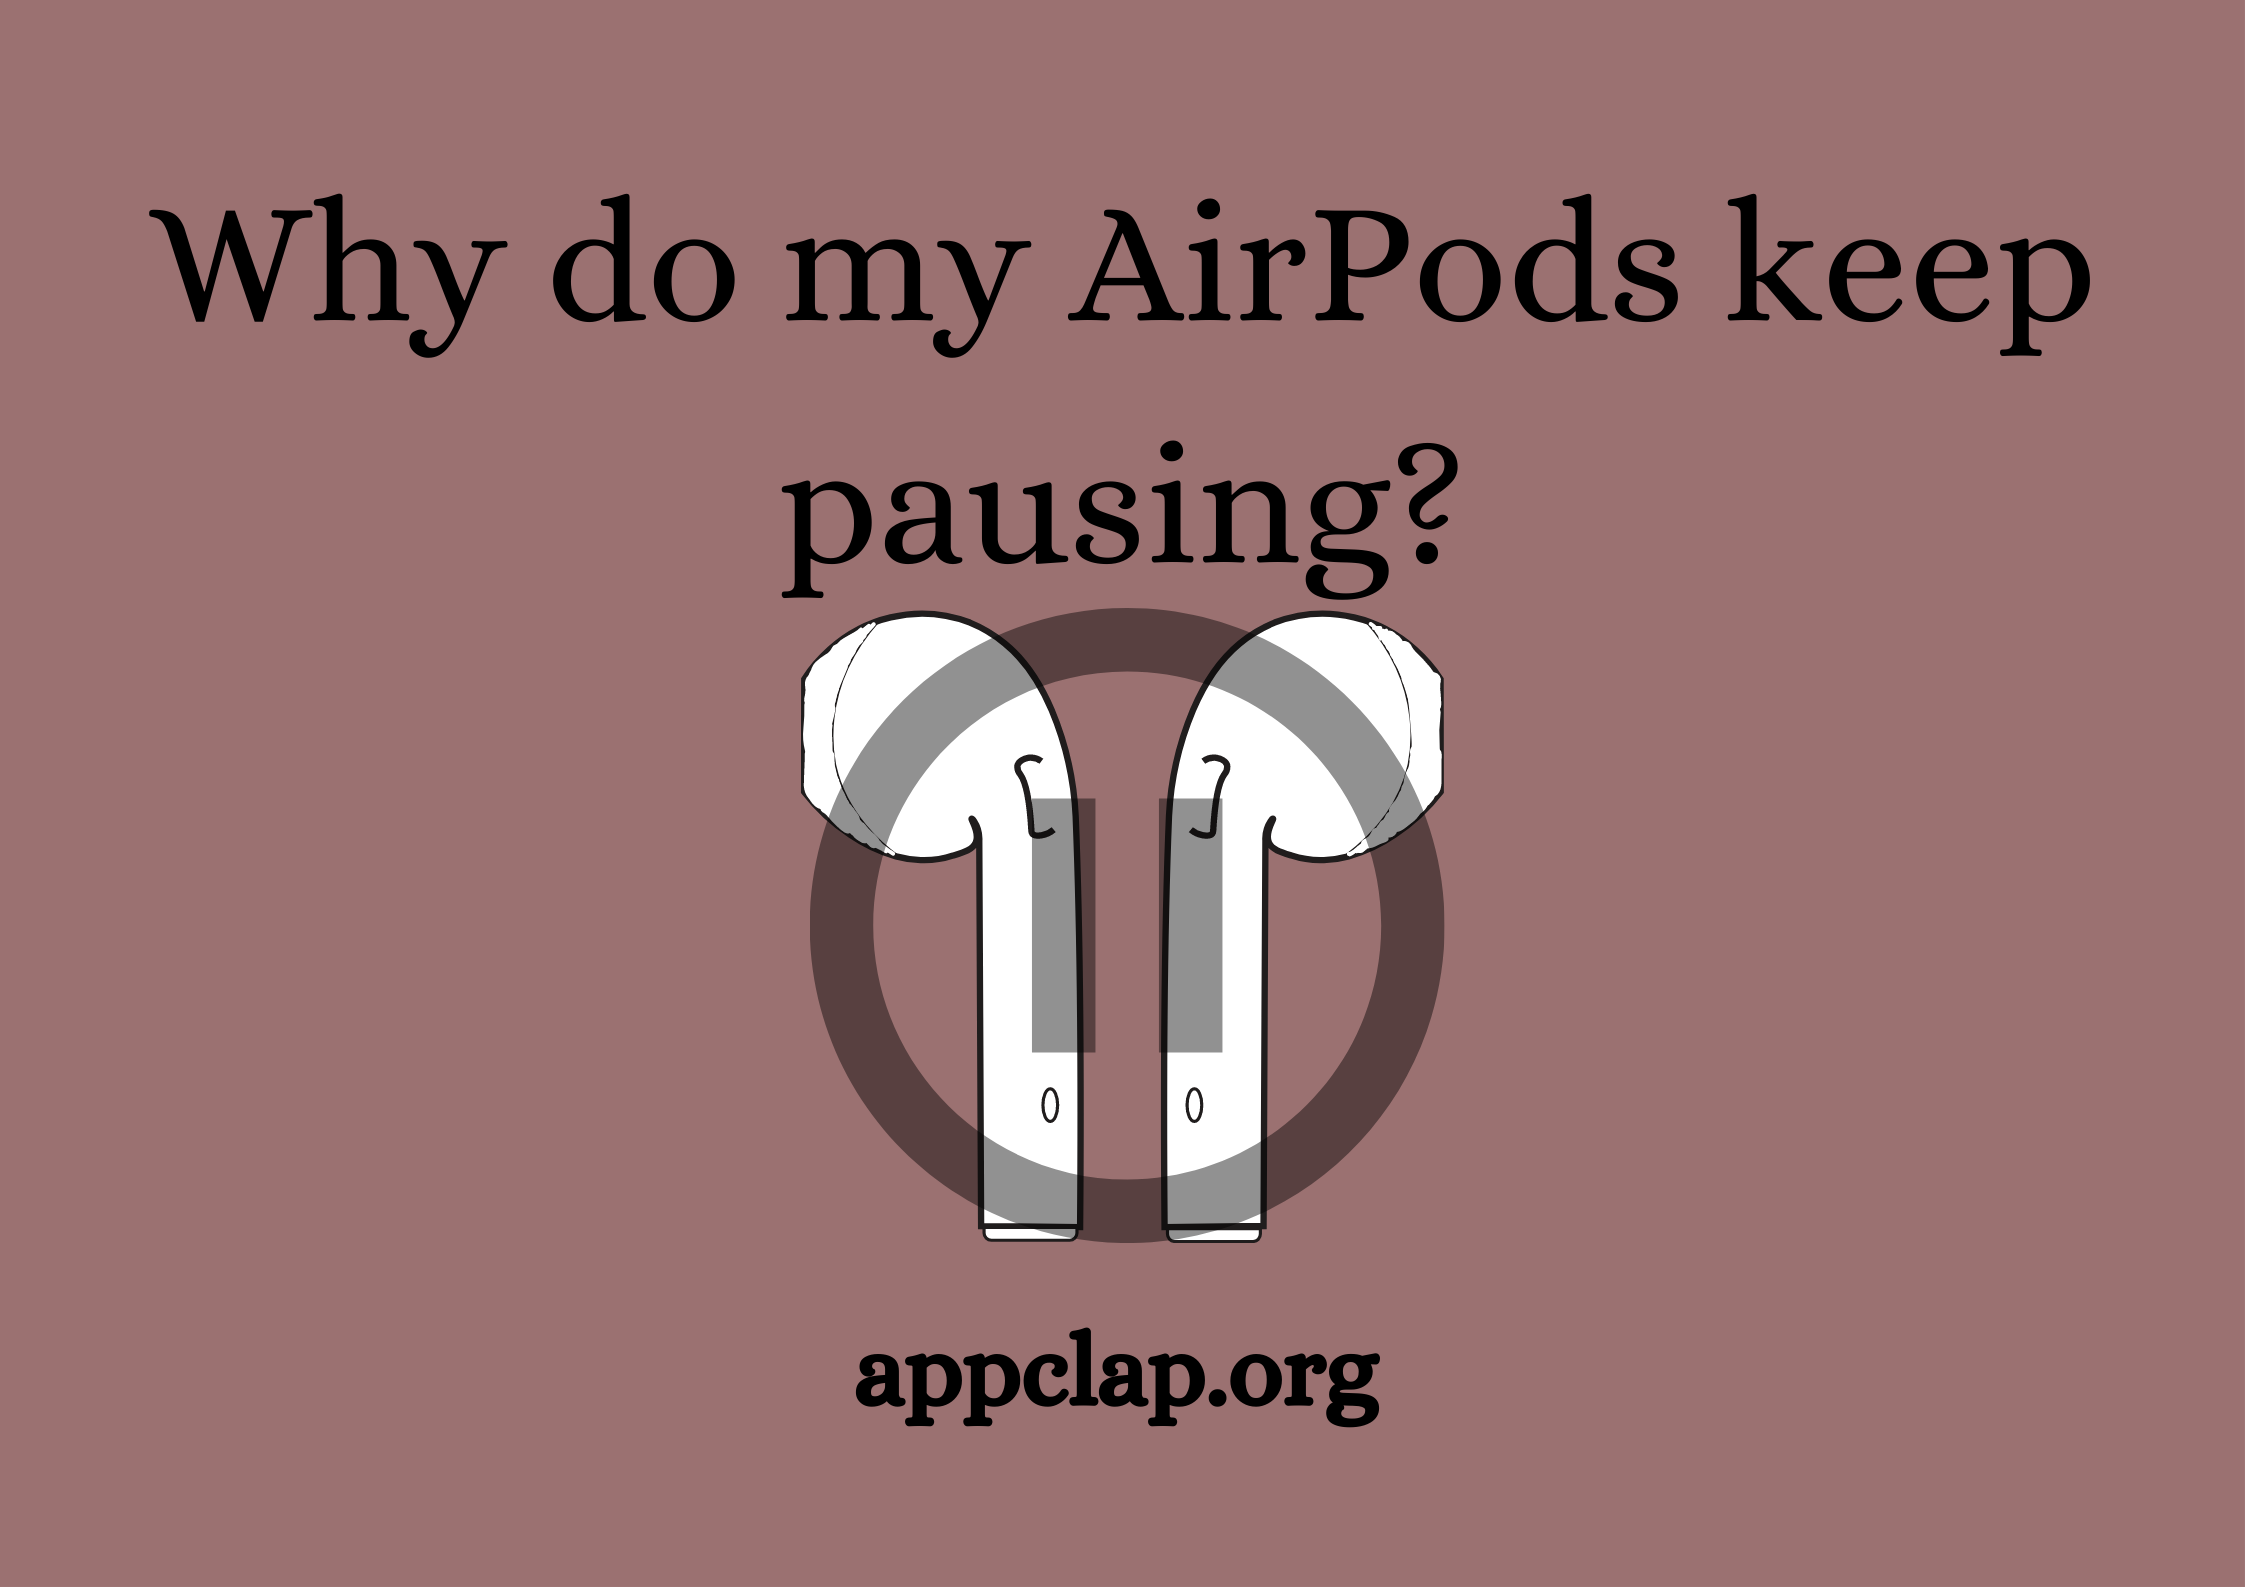 Why do my AirPods keep pausing?